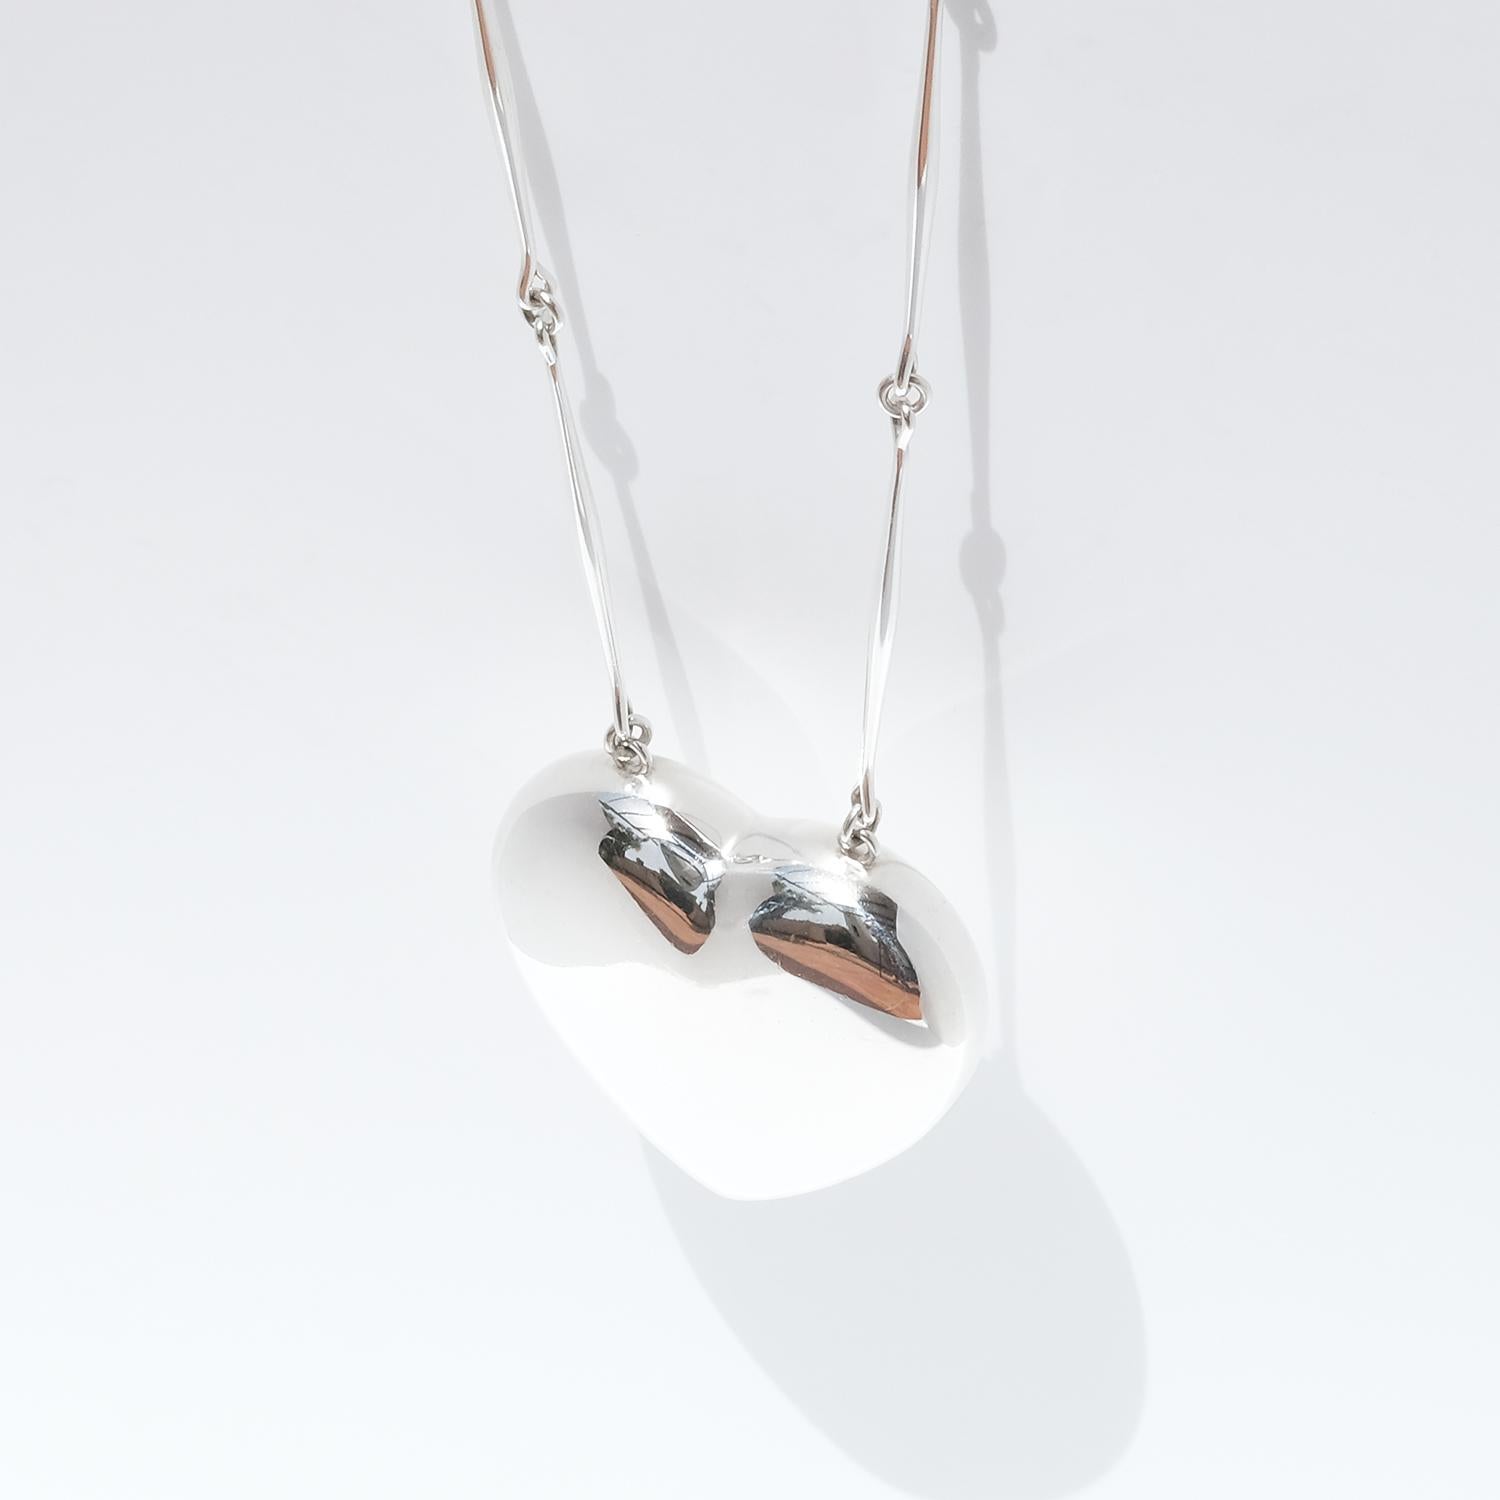 This sterling silver necklace has a distinct, very large heart pendant. It is a bold but at the same time elegant piece that is called Joy. It is not hard to see that Astrid Fog designed it in the 1970s.

This is a statement necklace which would